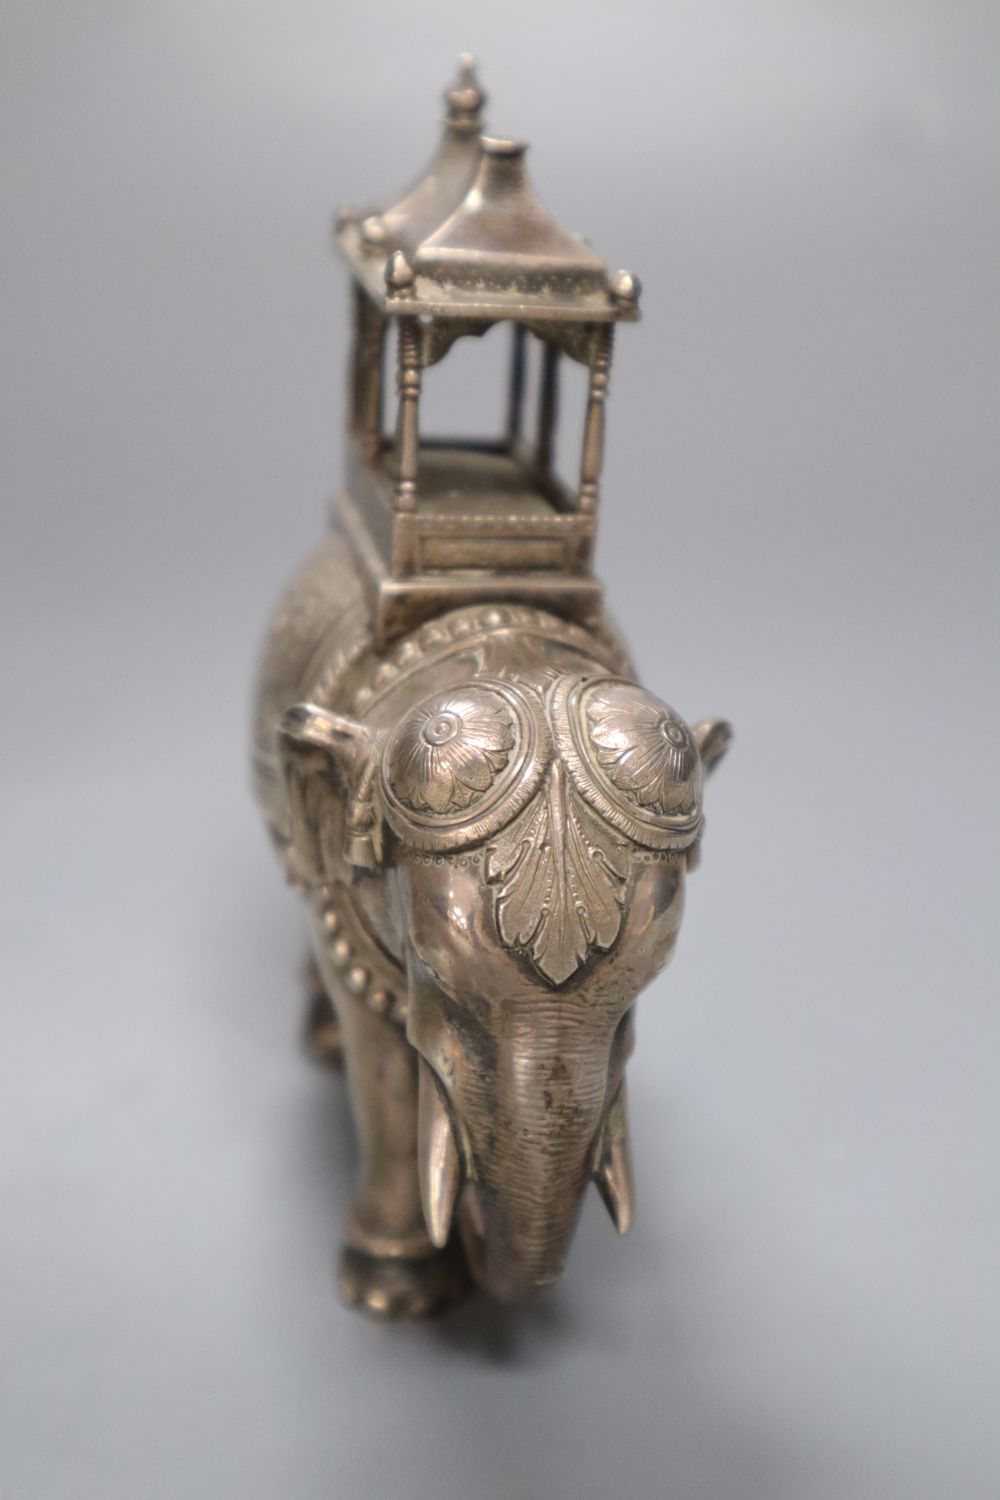 A pair of cast silver plated models of ceremonial elephants, 11cm high